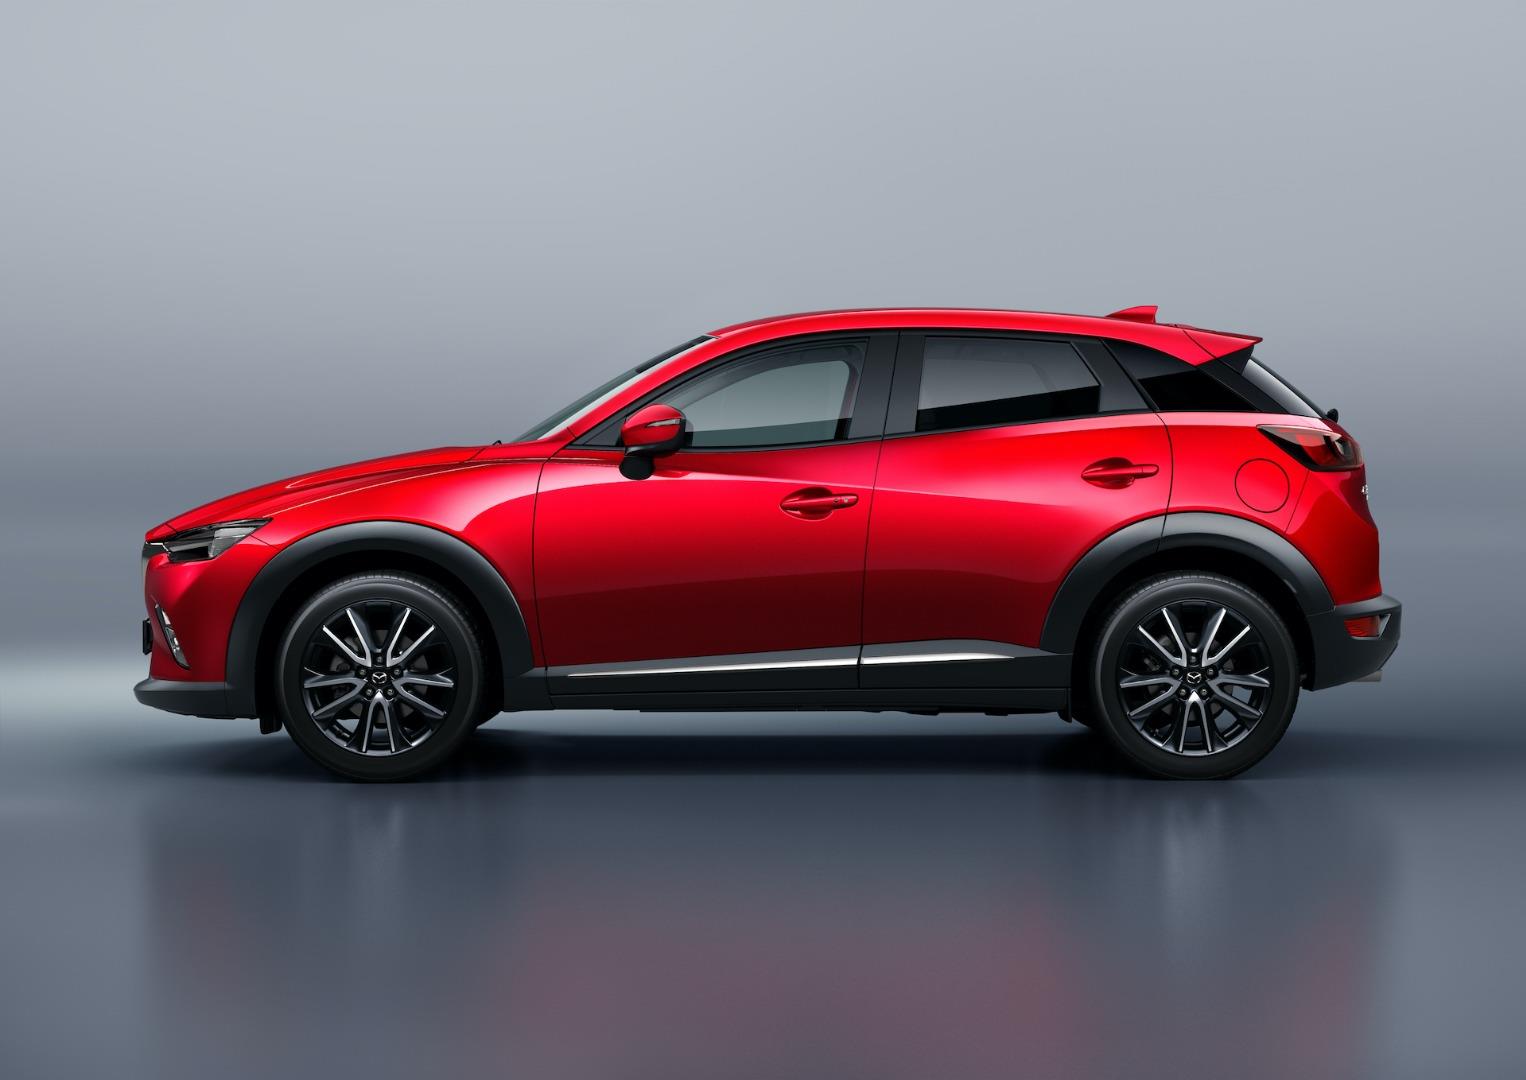 does the mazda cx-3 have a sunroof?